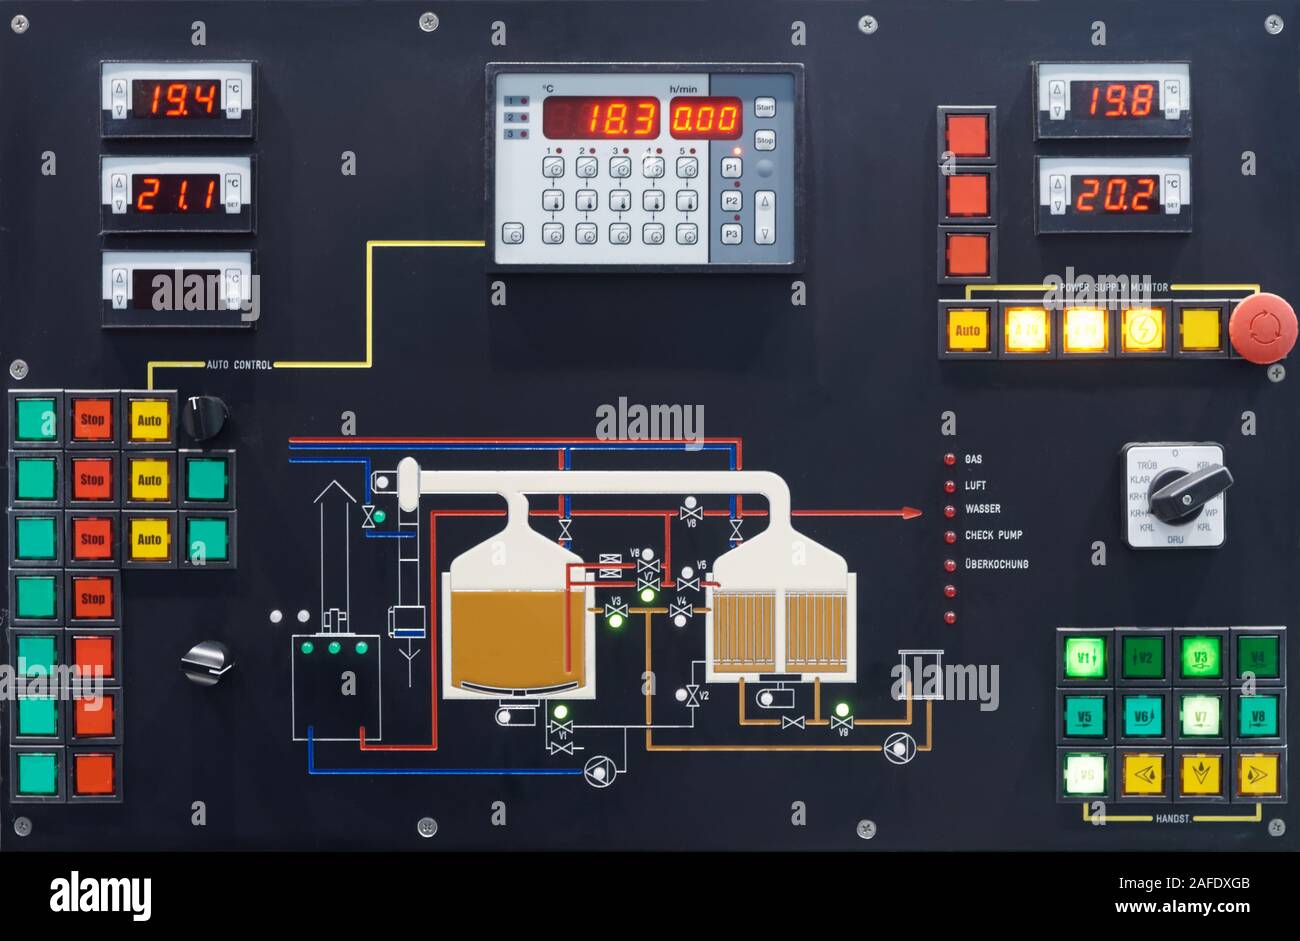 Electronic brewery control display Stock Photo